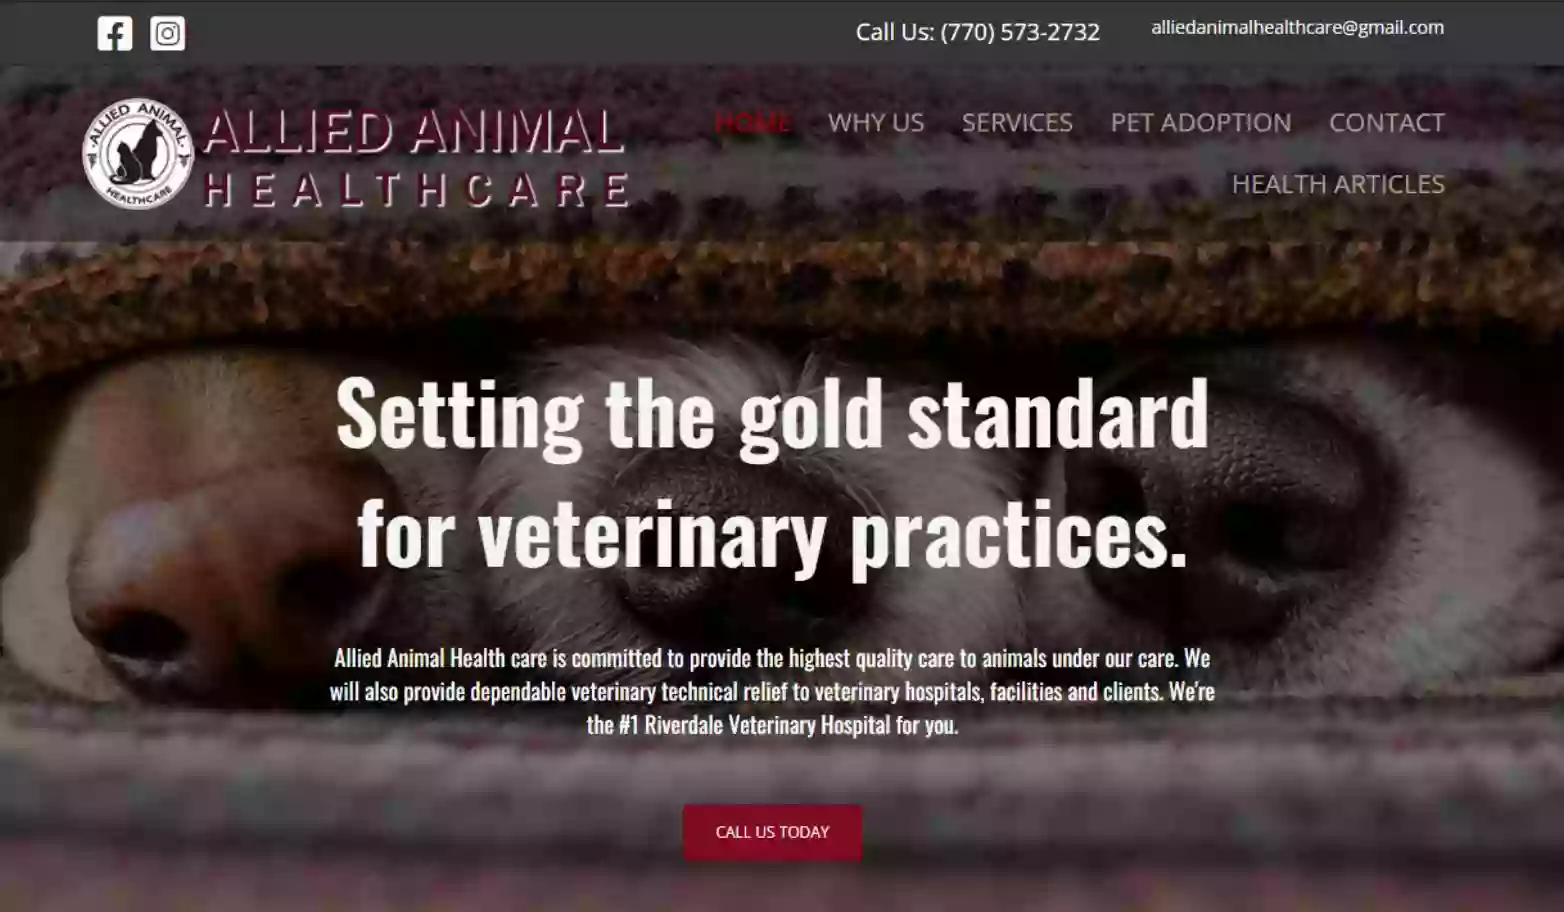 Allied Animal HealthCare